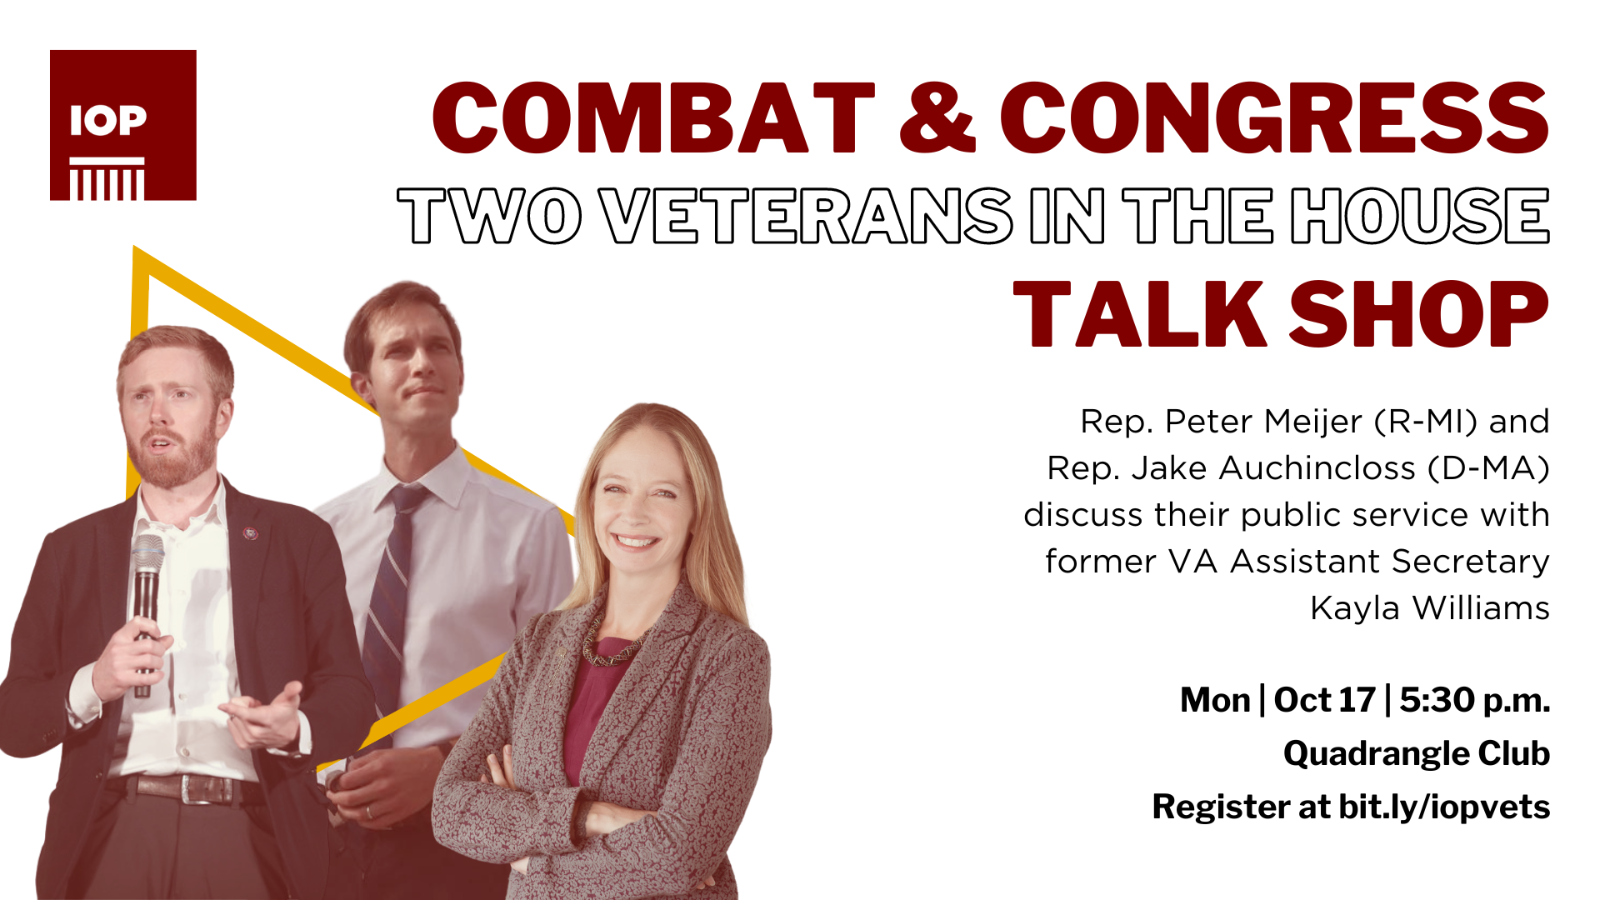 Combat and Congress: Two Veterans in the House Talk Shop